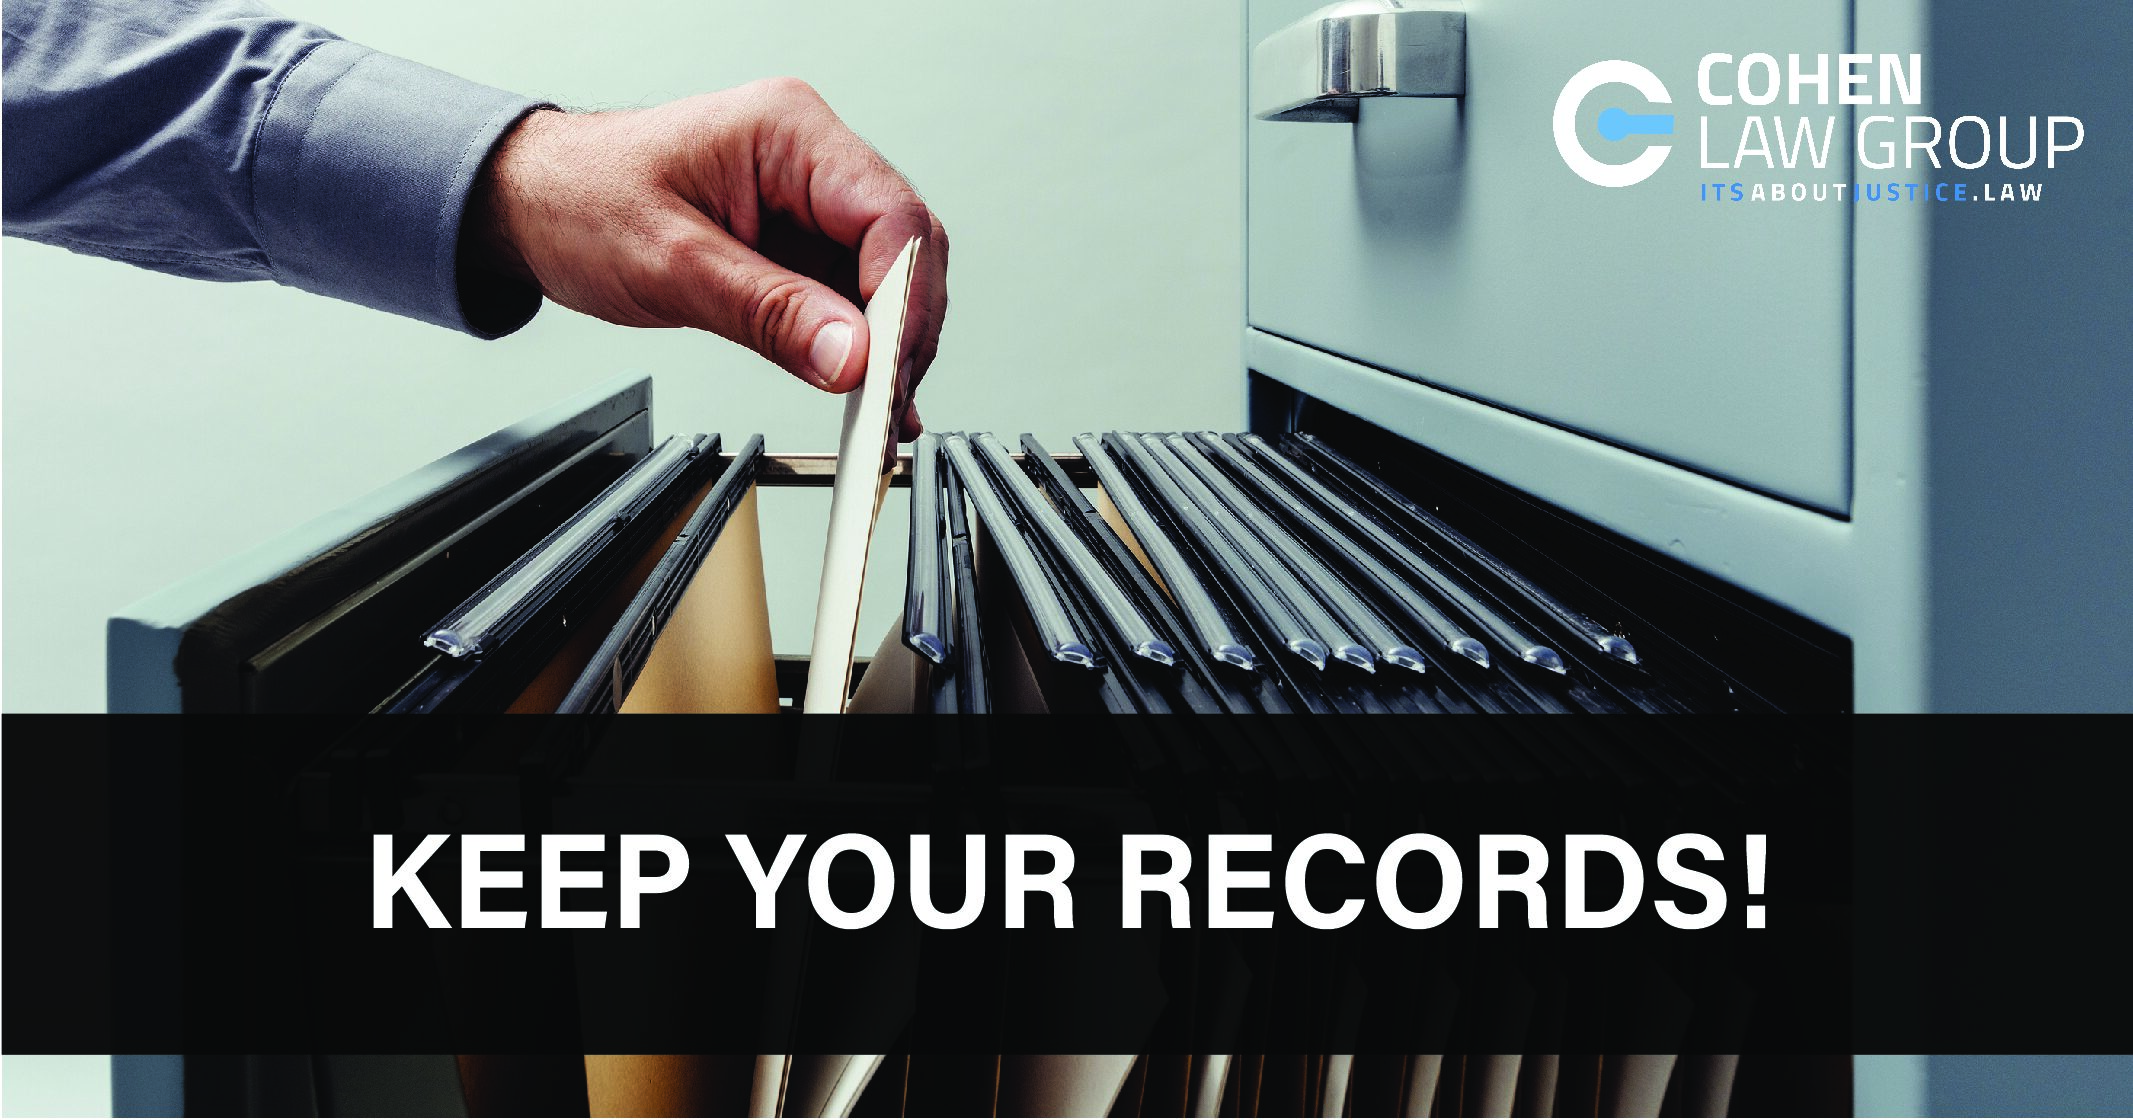 Save Your Records!